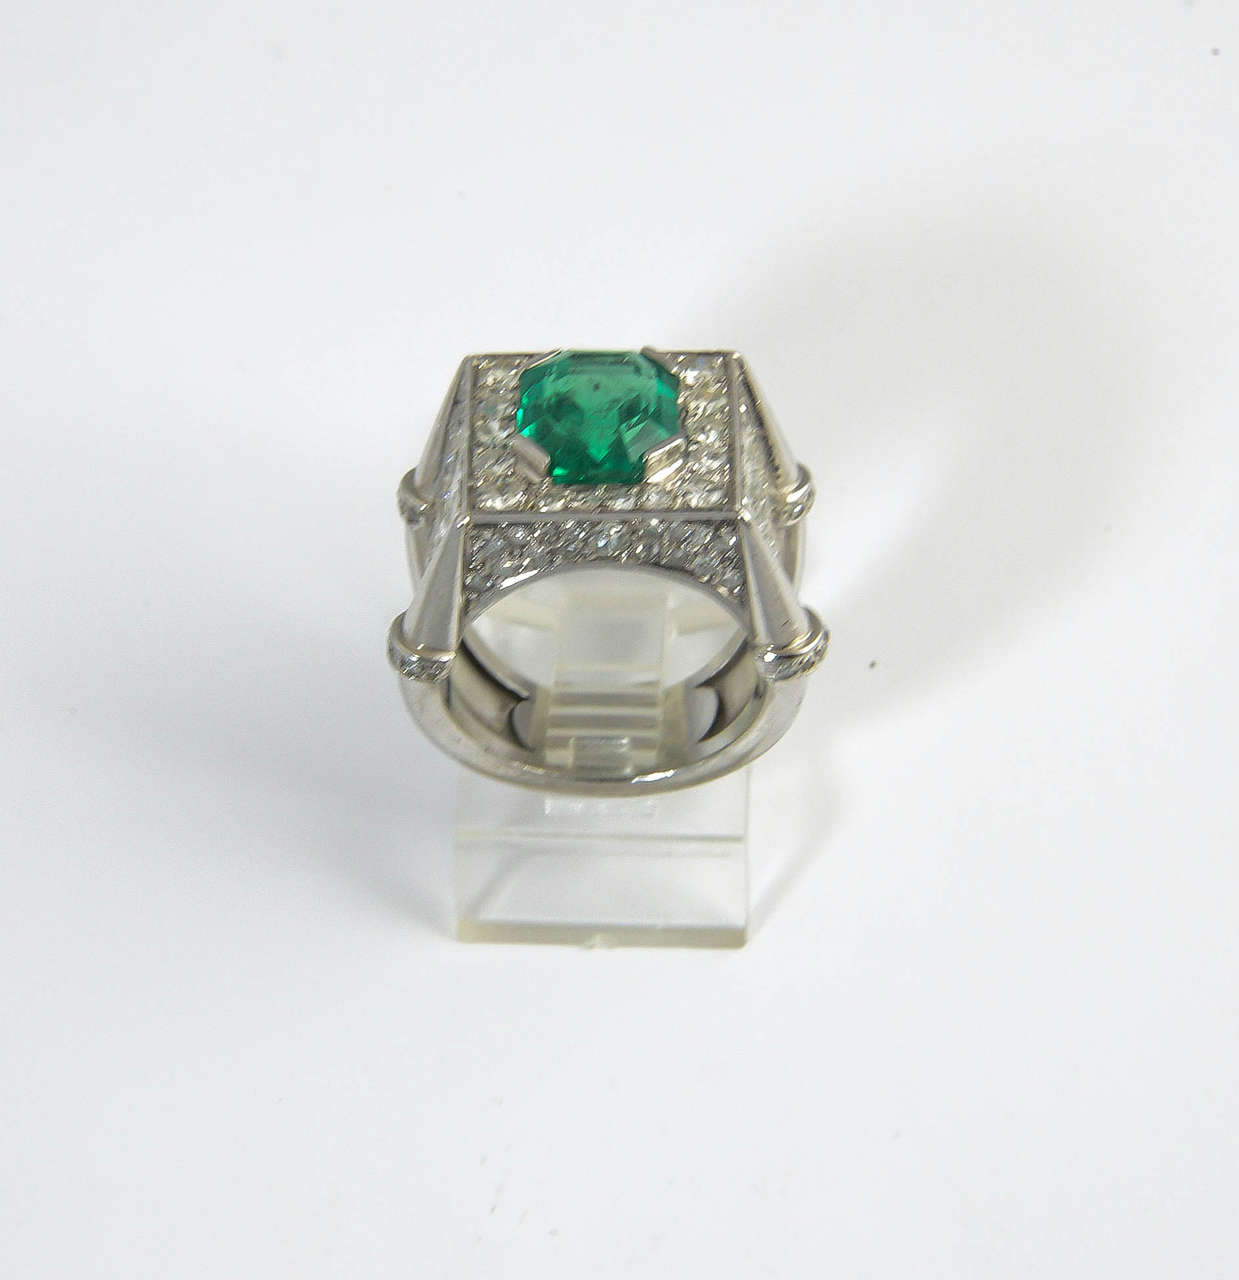 Fine 3 carat emerald set in a highly stylized 18k white gold mounting with diamonds on every side.

US size 6.5